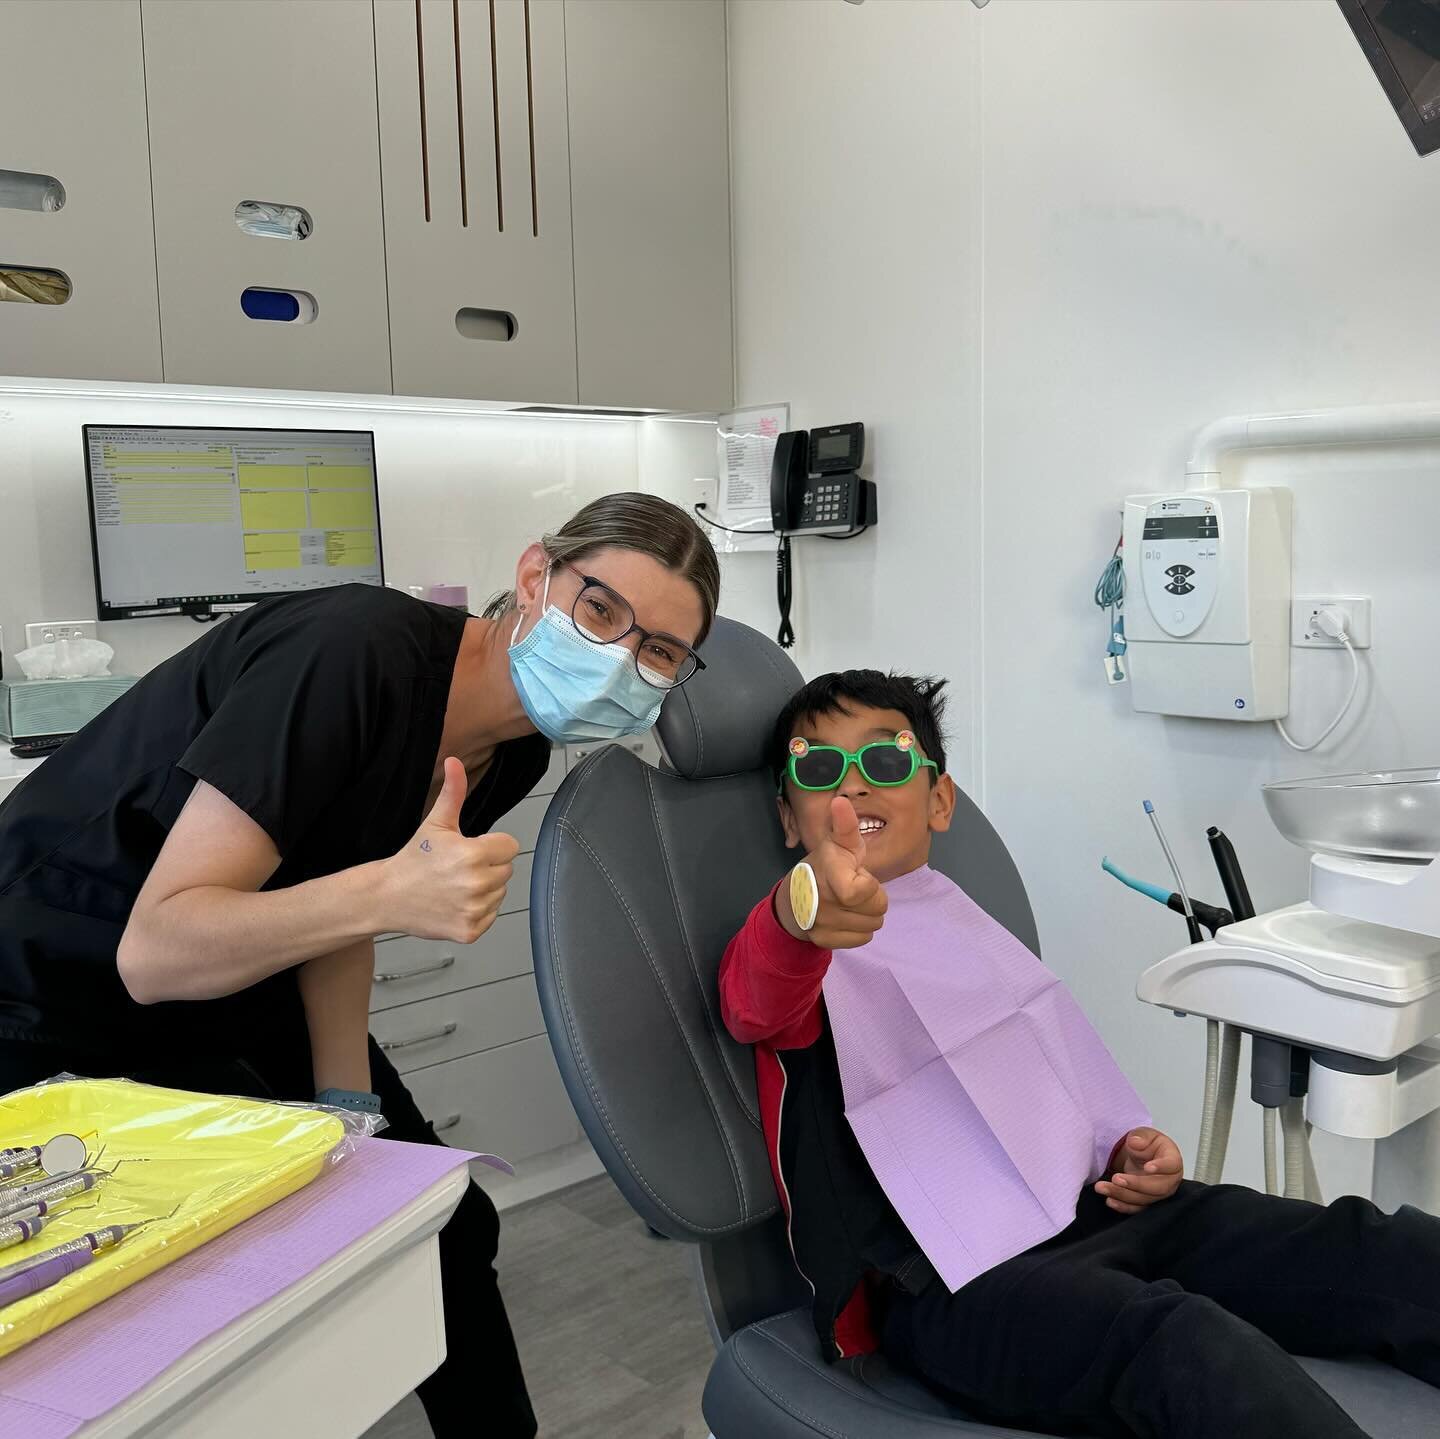 Creating ✨fun ✨first visits with our awesome Oral Health Therapist Josie! 

We love making our first dental visits fun and exciting - early visits mean prevention and better experiences 🥰🎉 #bcdental #smiles #kidsdental #baysidedentist